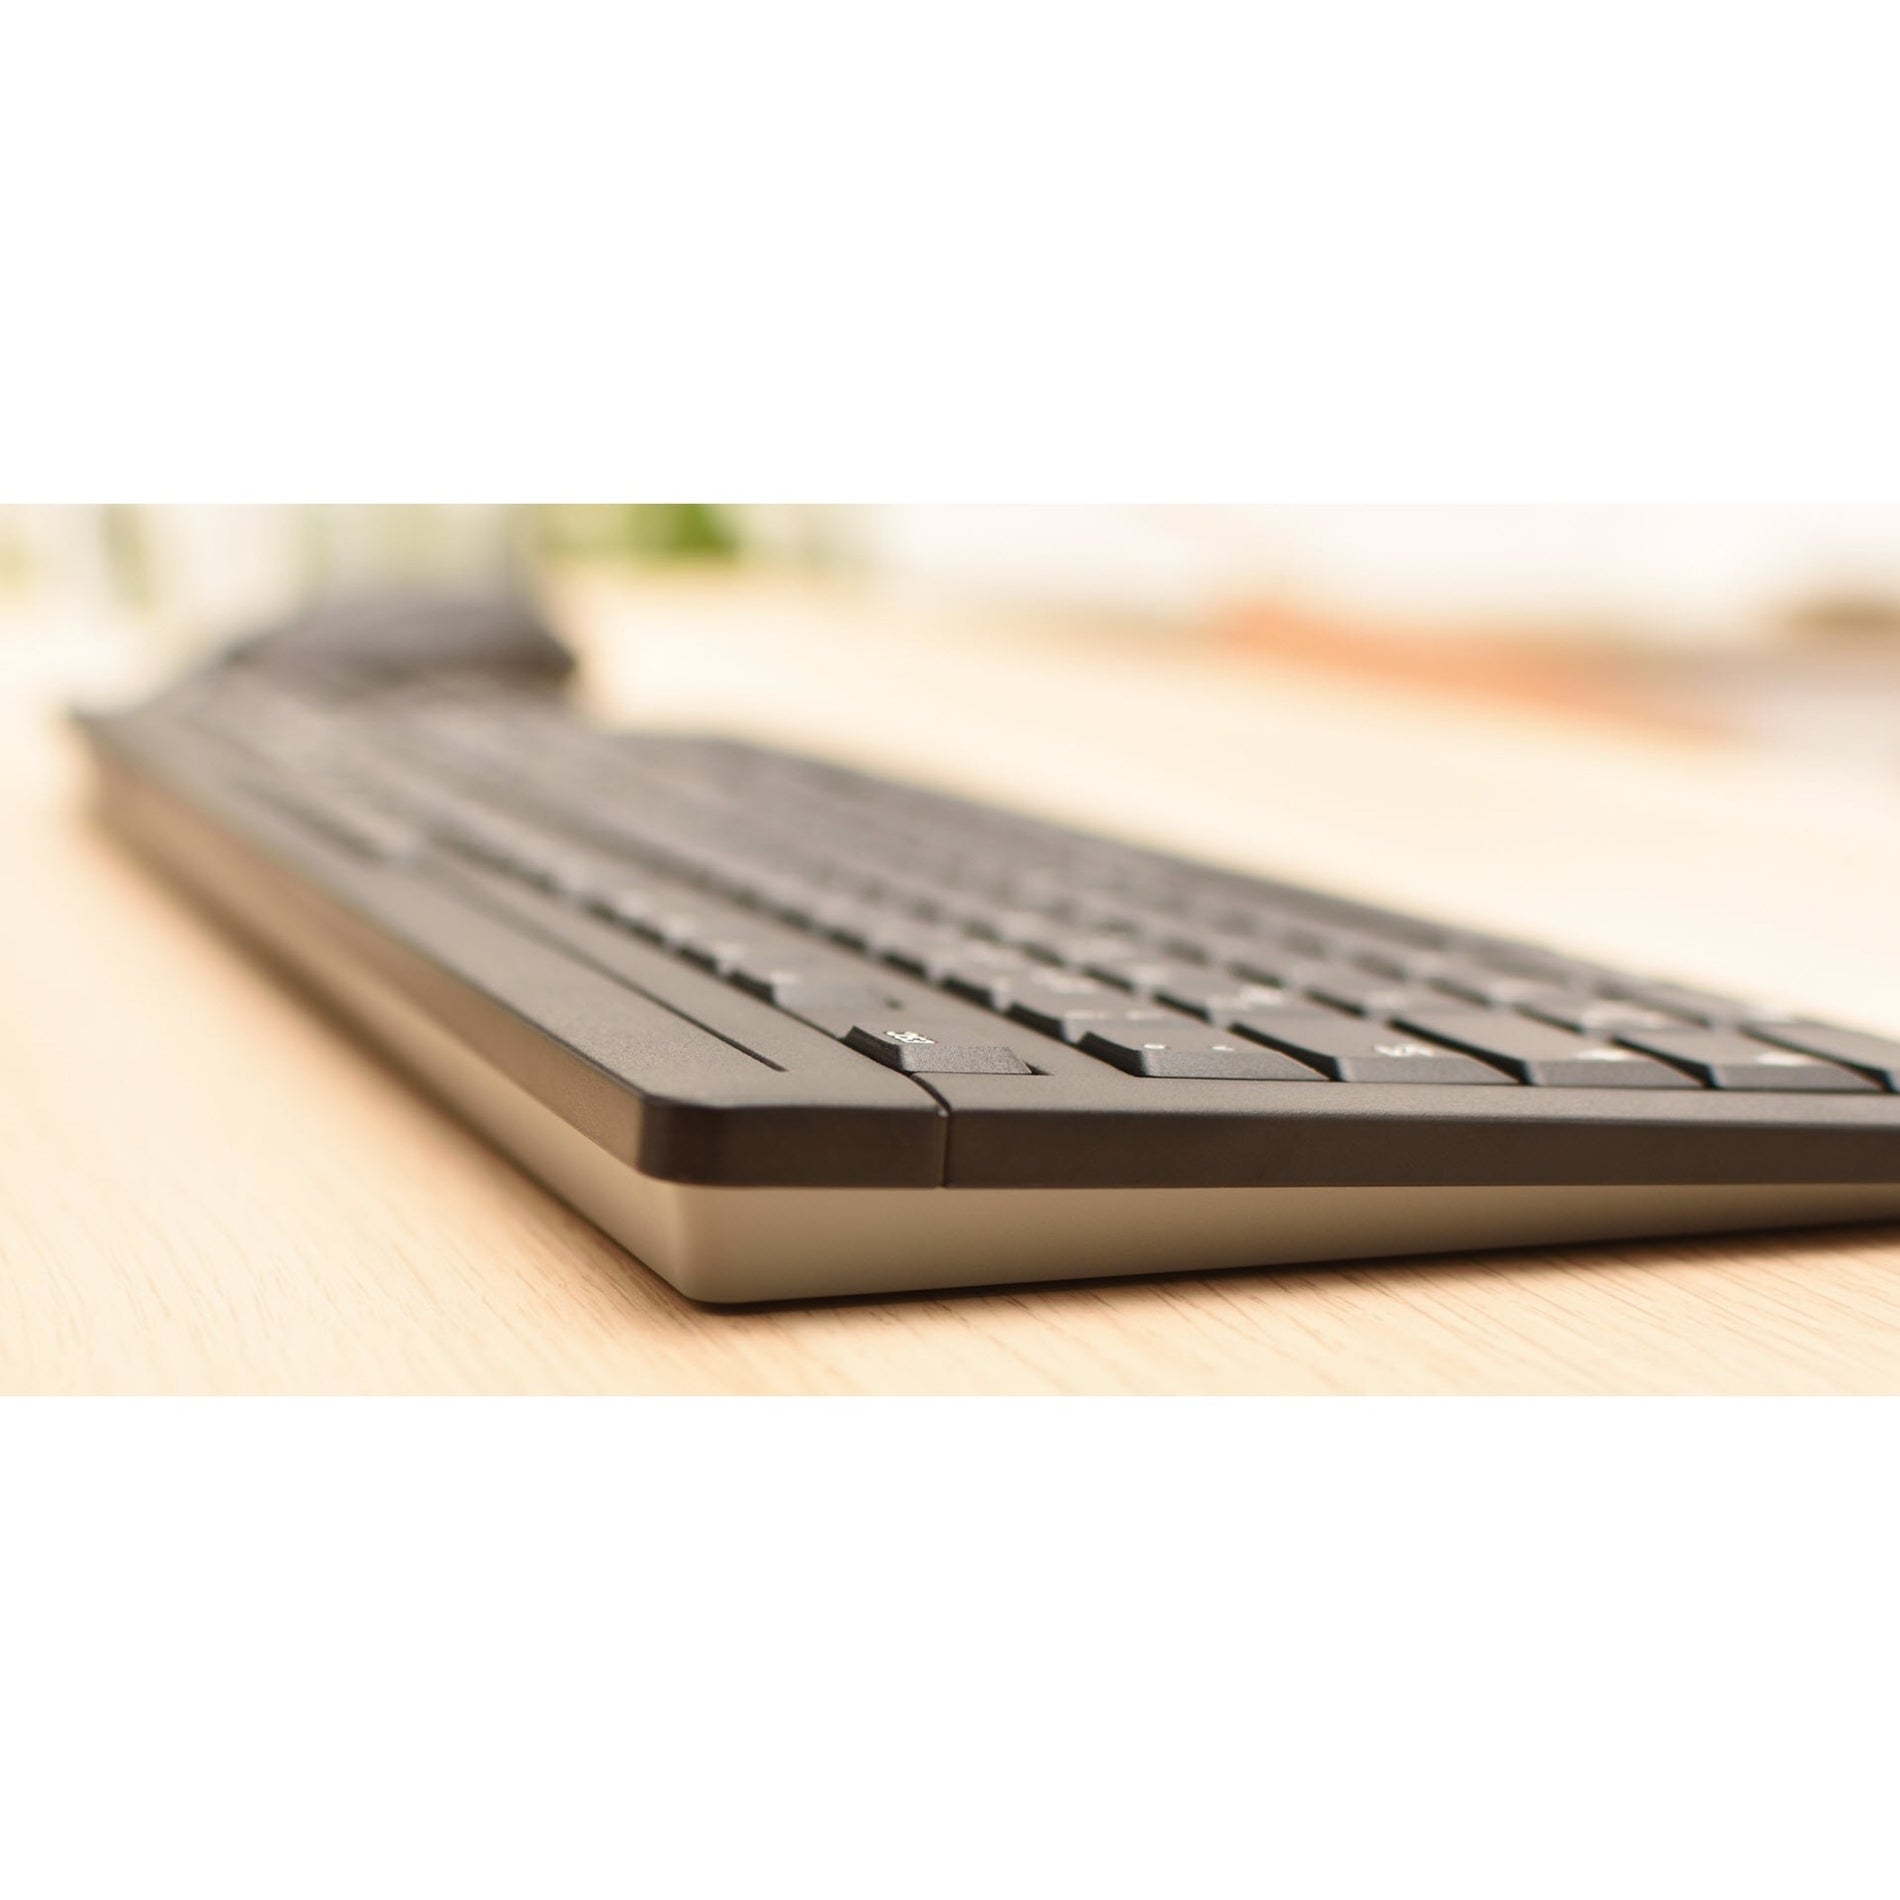 CHERRY JK-8500GB-2 STREAM Keyboard, Spill Resistant, Abrasion Resistant, USB Connectivity